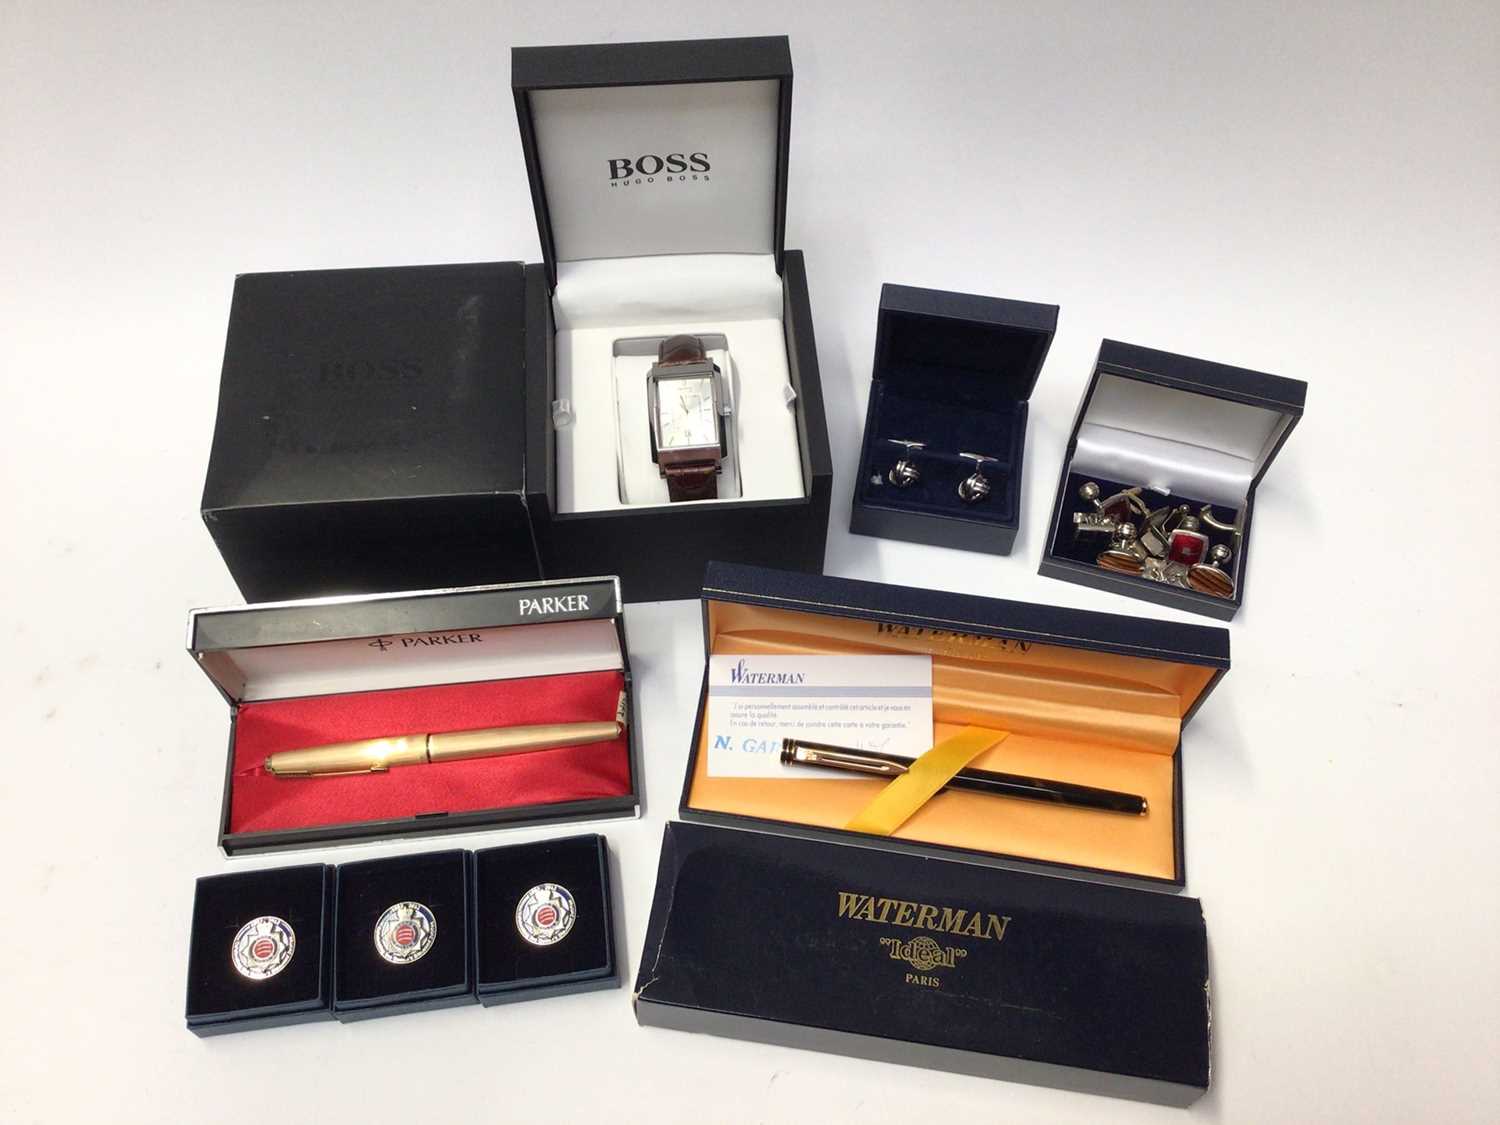 Lot 195 - Hugo Boss wristwatch in box, silver and other cufflinks, Parker and Waterman pens